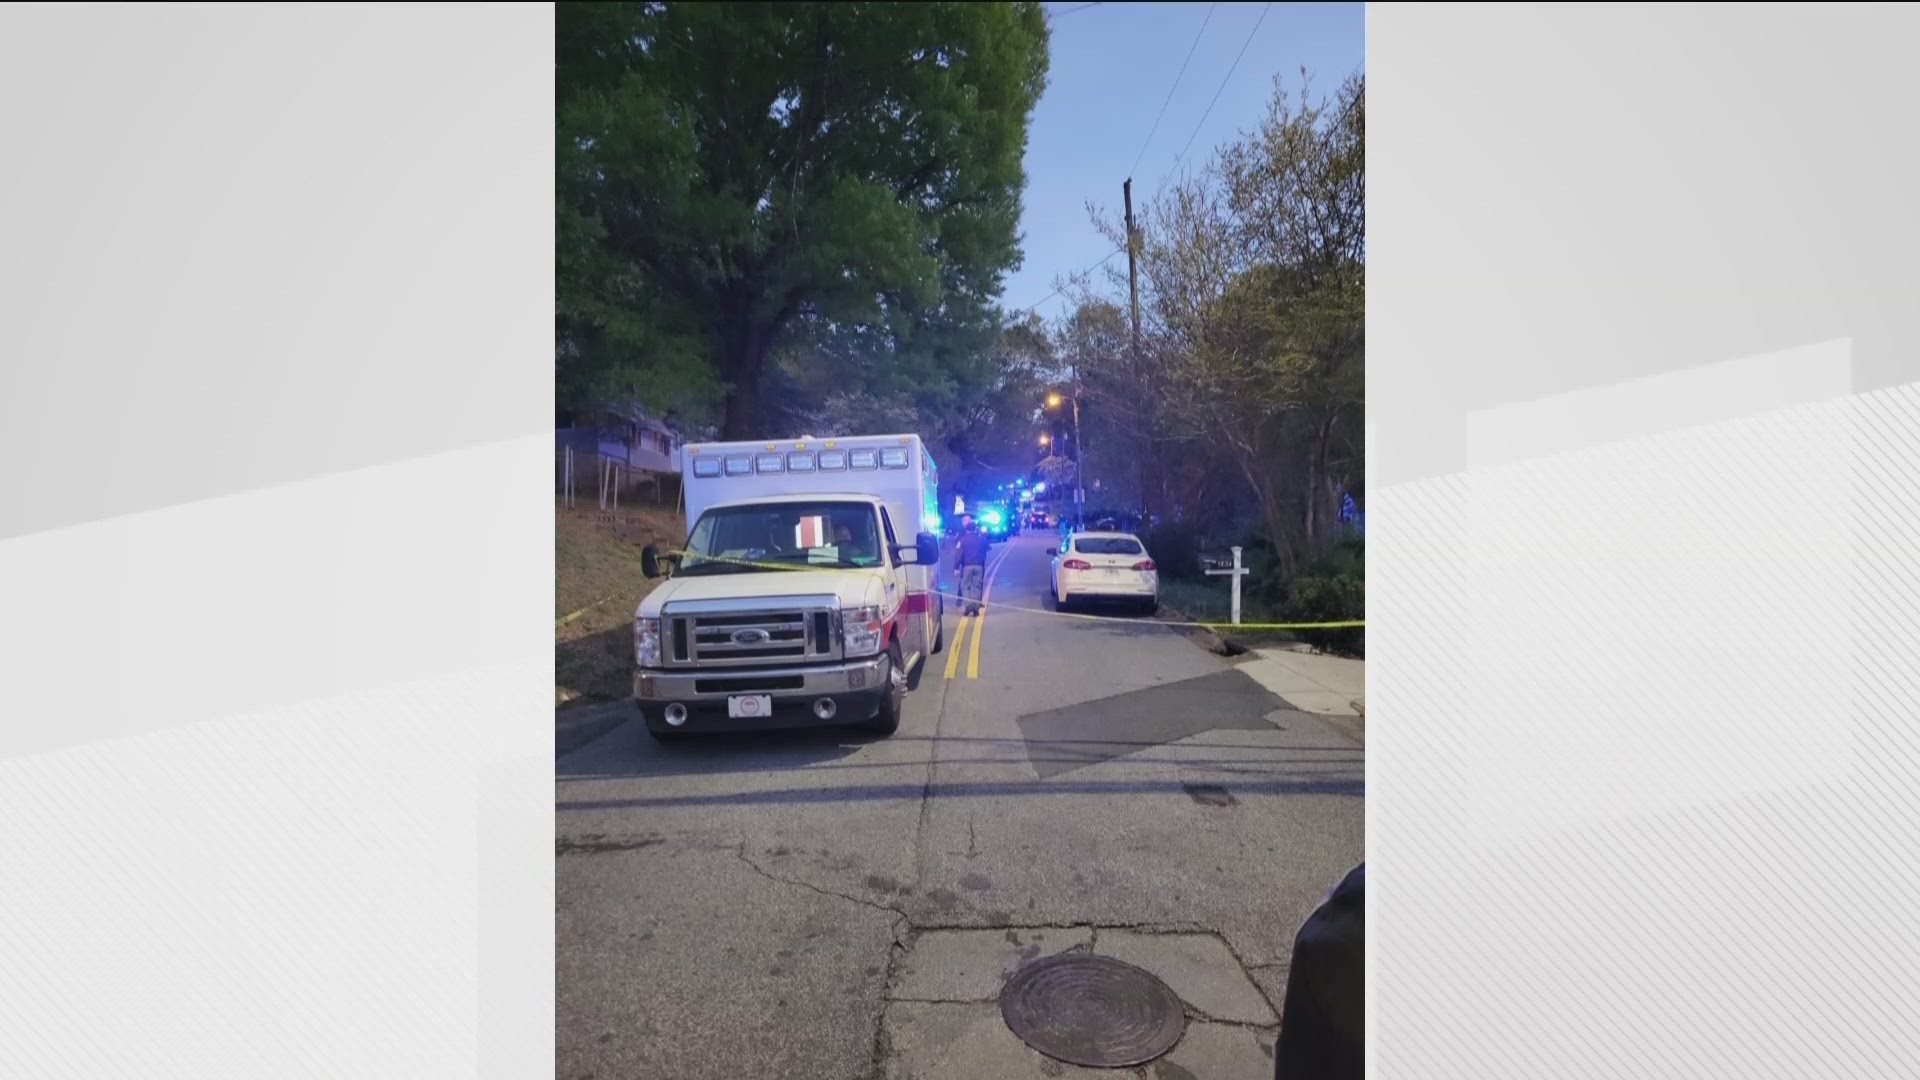 A suspect believed to be linked to several crimes has barricaded themselves inside of a home in Marietta Saturday night.